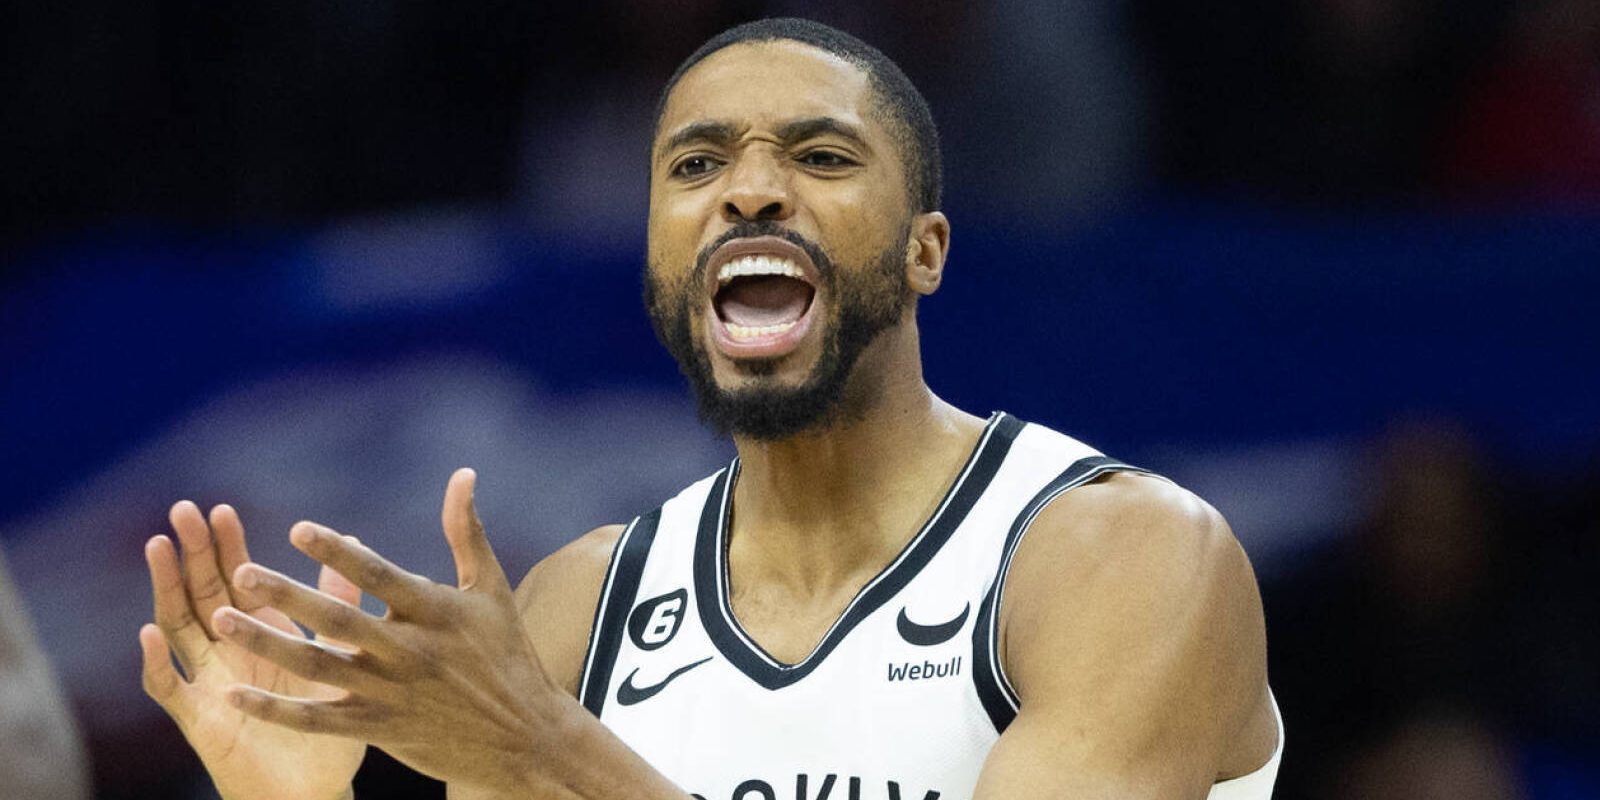 Apr 17, 2023; Philadelphia, Pennsylvania, USA; Brooklyn Nets forward Mikal Bridges (1) reacts after a defensive stop against the Philadelphia 76ers during the third quarter in game two of the 2023 NBA playoffs at Wells Fargo Center. Mandatory Credit: Bill Streicher-USA TODAY Sports